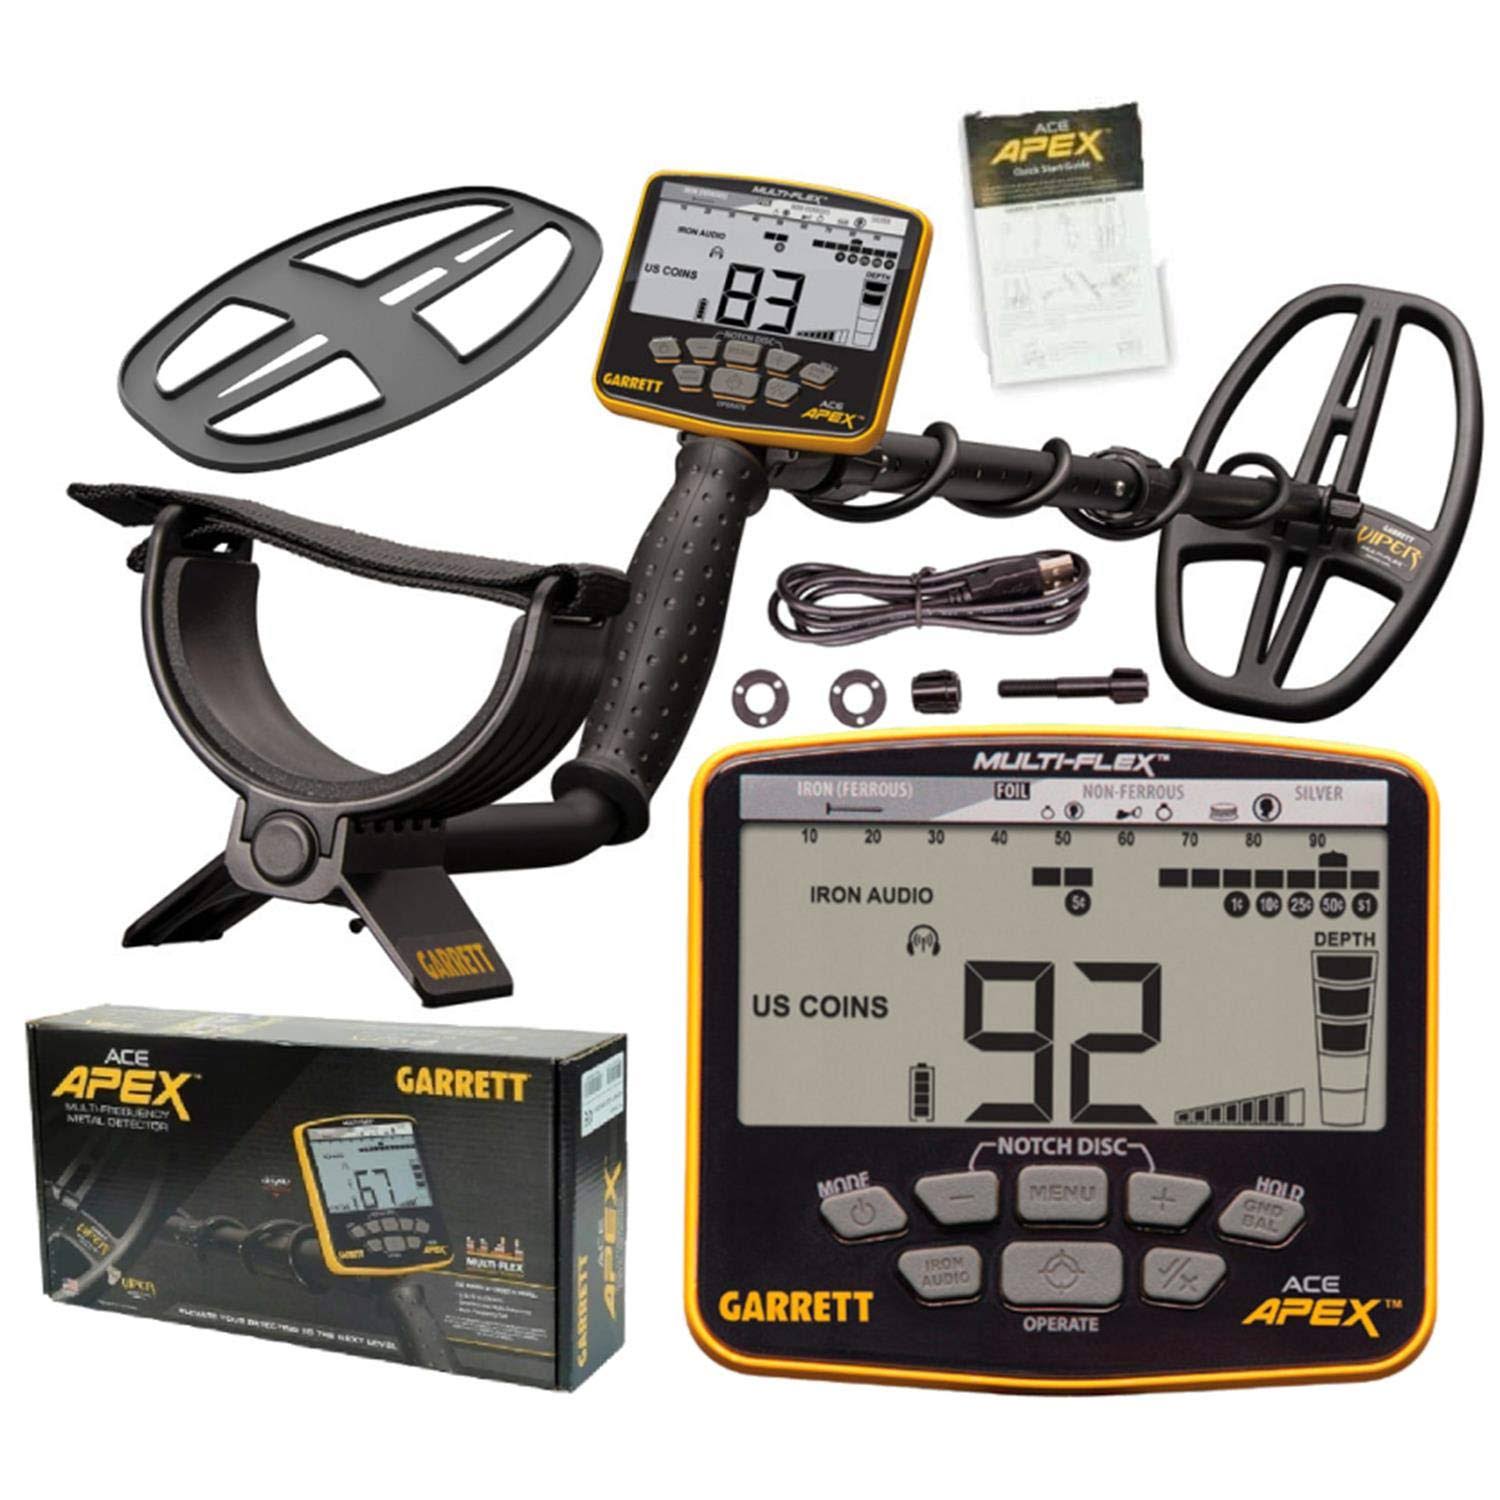 Garrett Ace Apex Metal Detector with Multi Frequency Technology